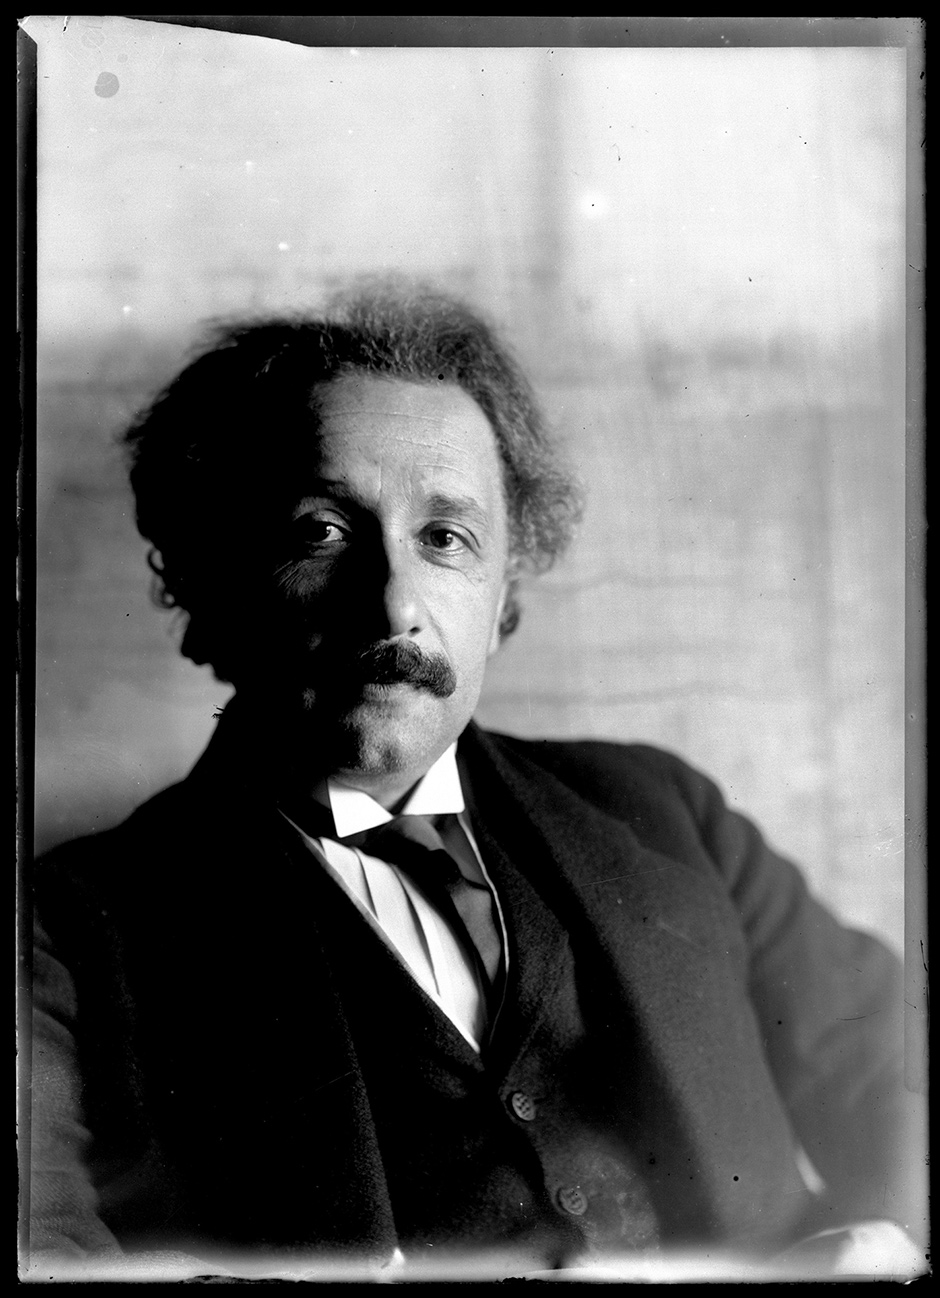 Einstein as a Jew and a Philosopher